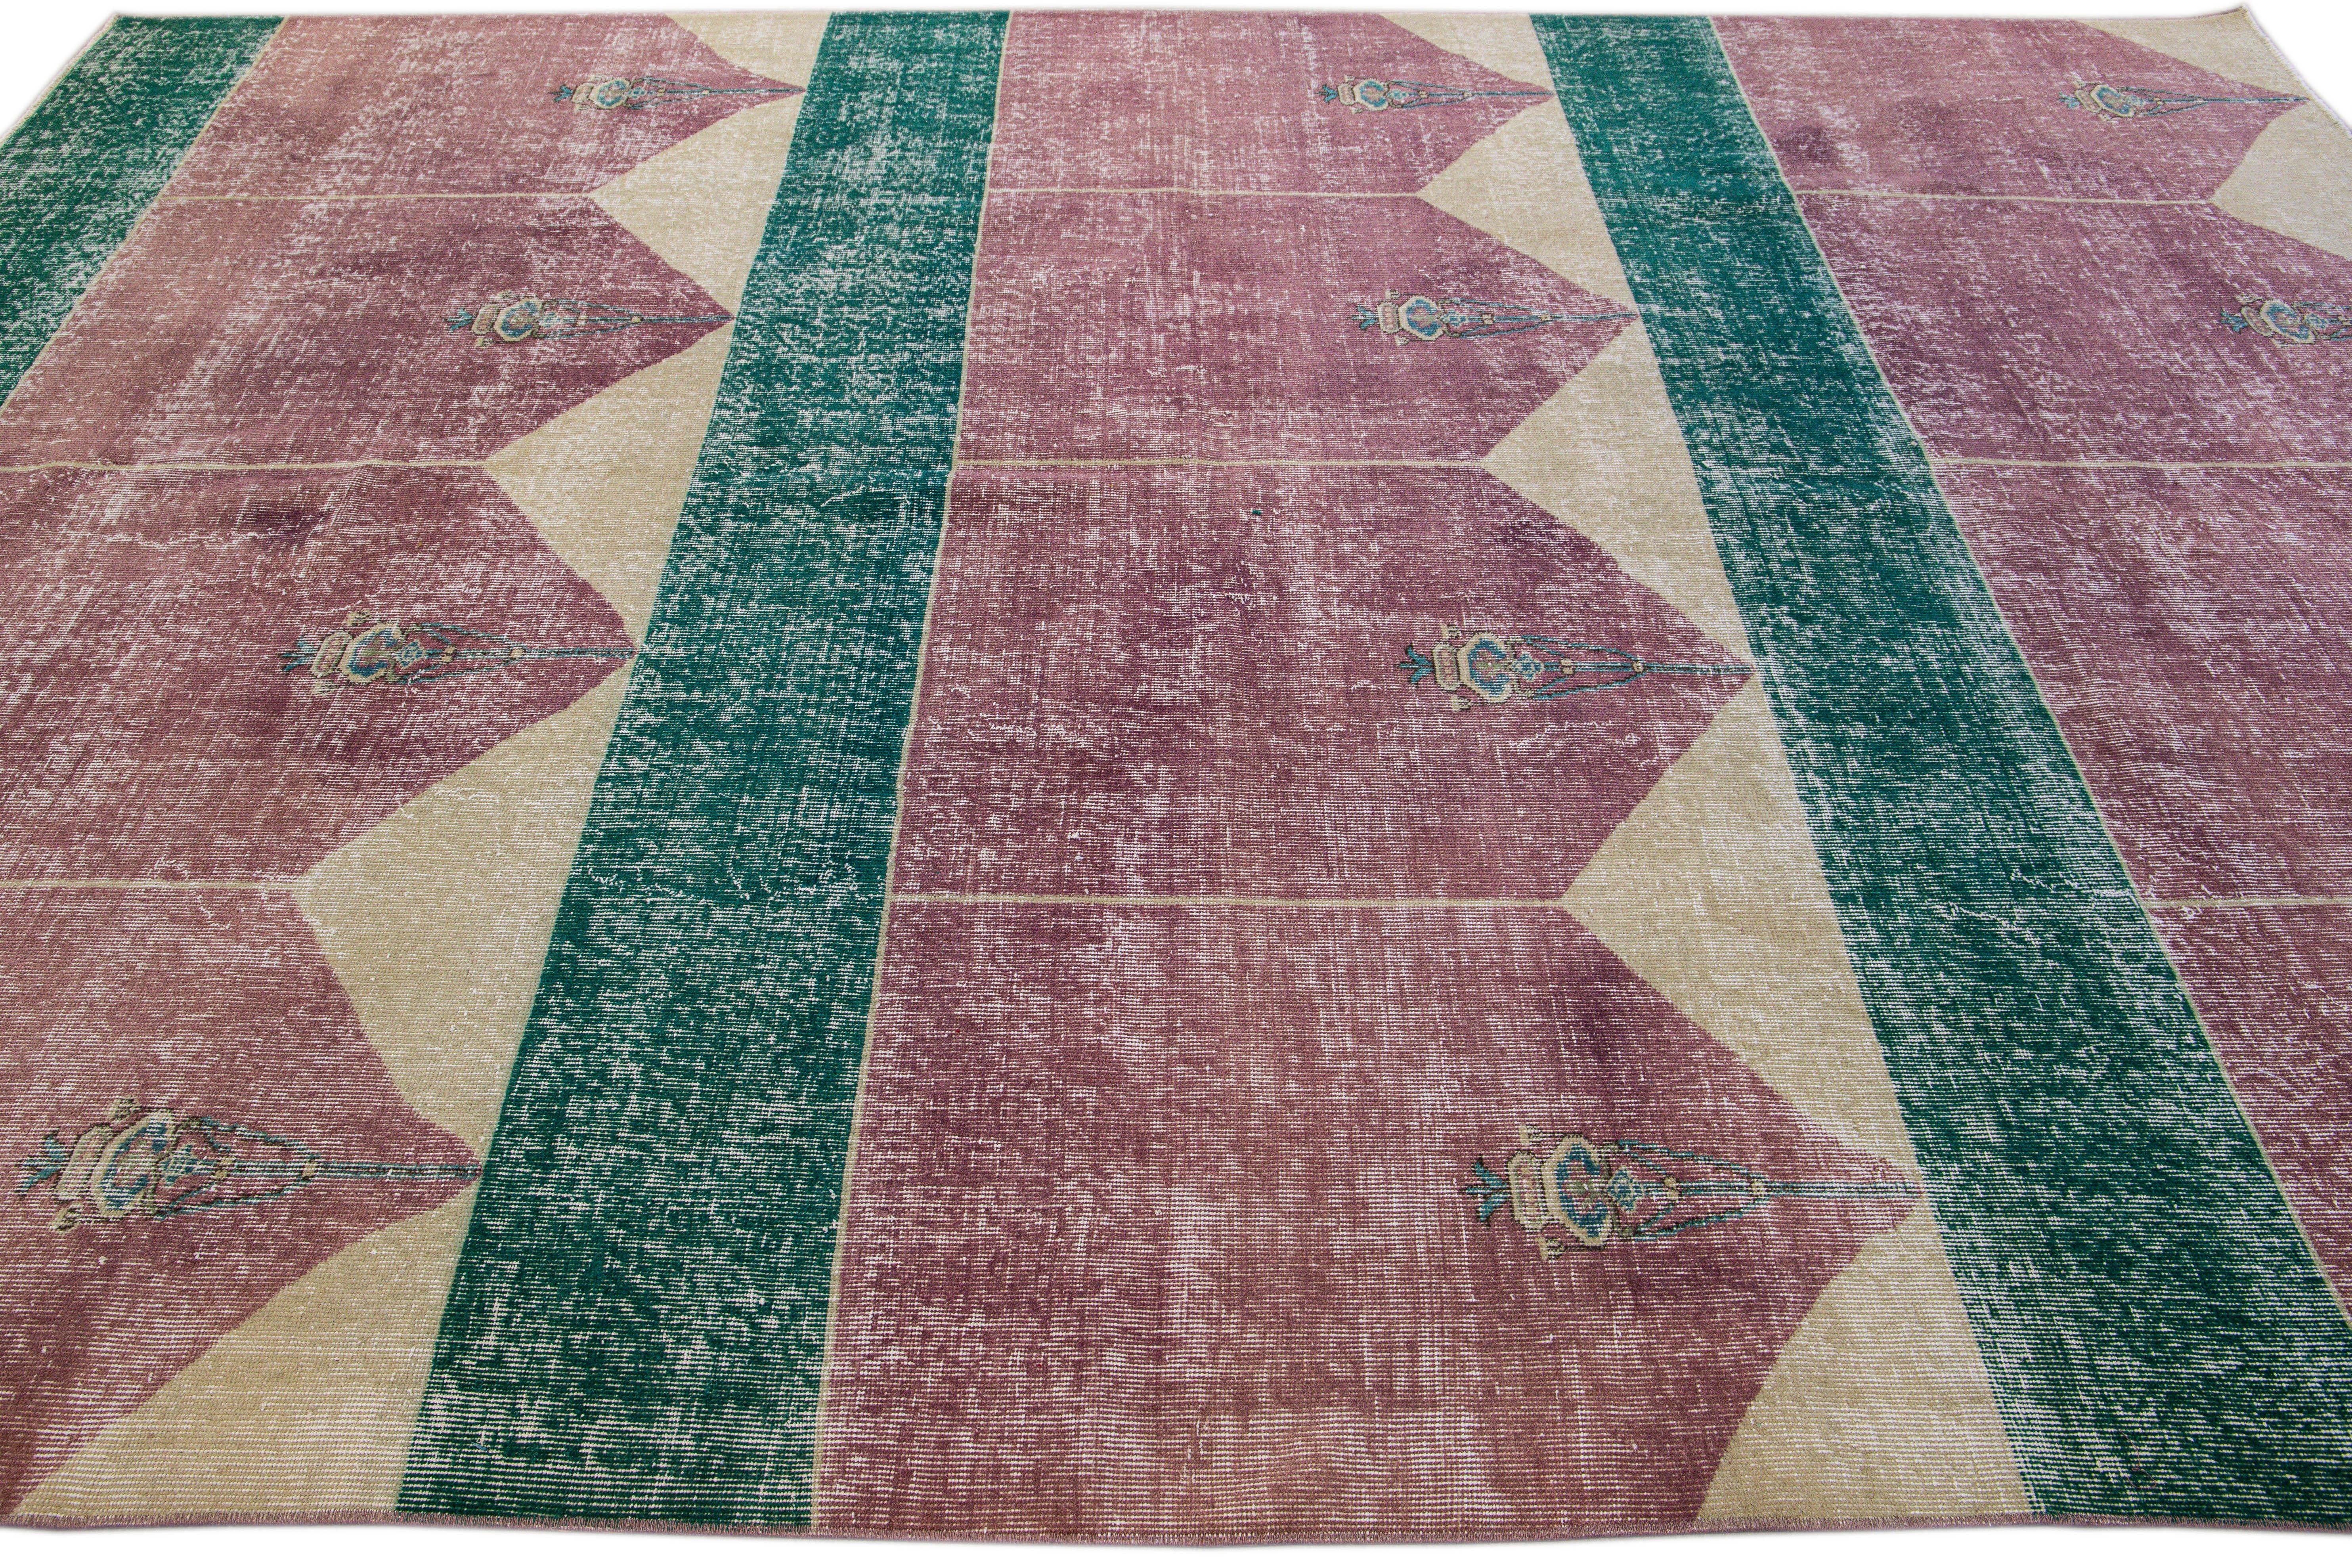 Vintage Turkish Deco Handmade Geometric Motif Burgundy and Green Wool Rug In Distressed Condition For Sale In Norwalk, CT